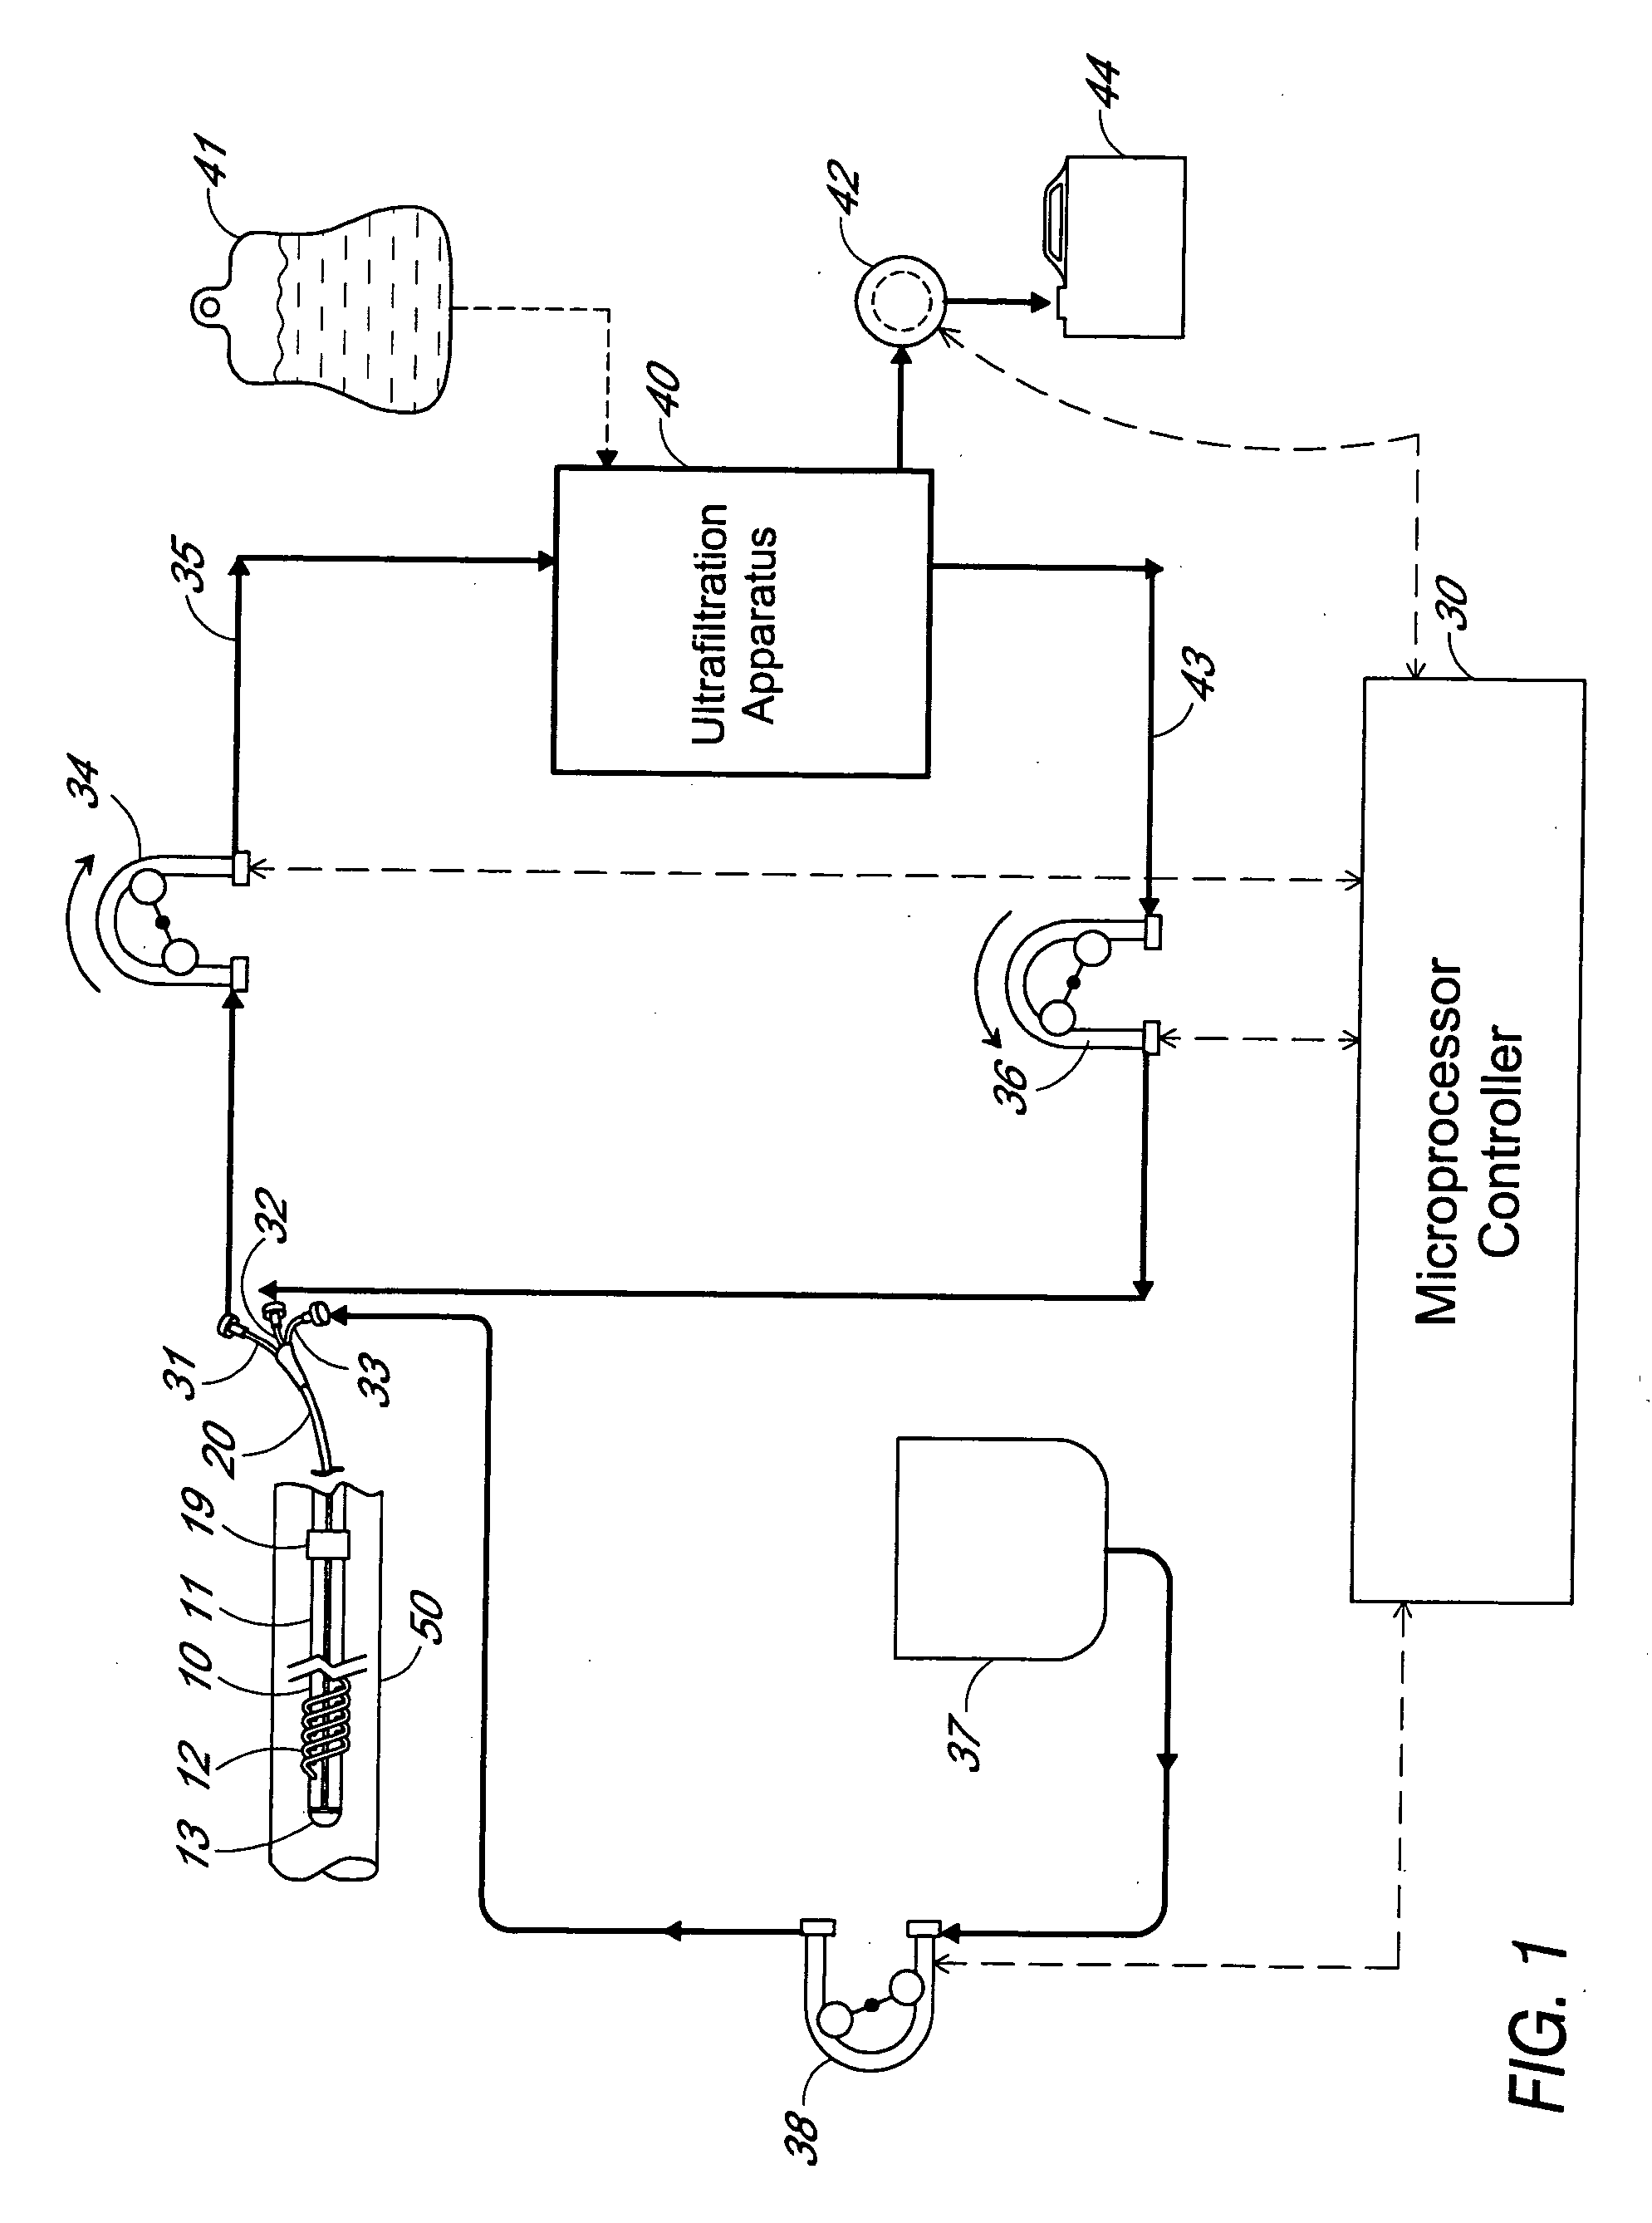 Method and apparatus for patient fluid management